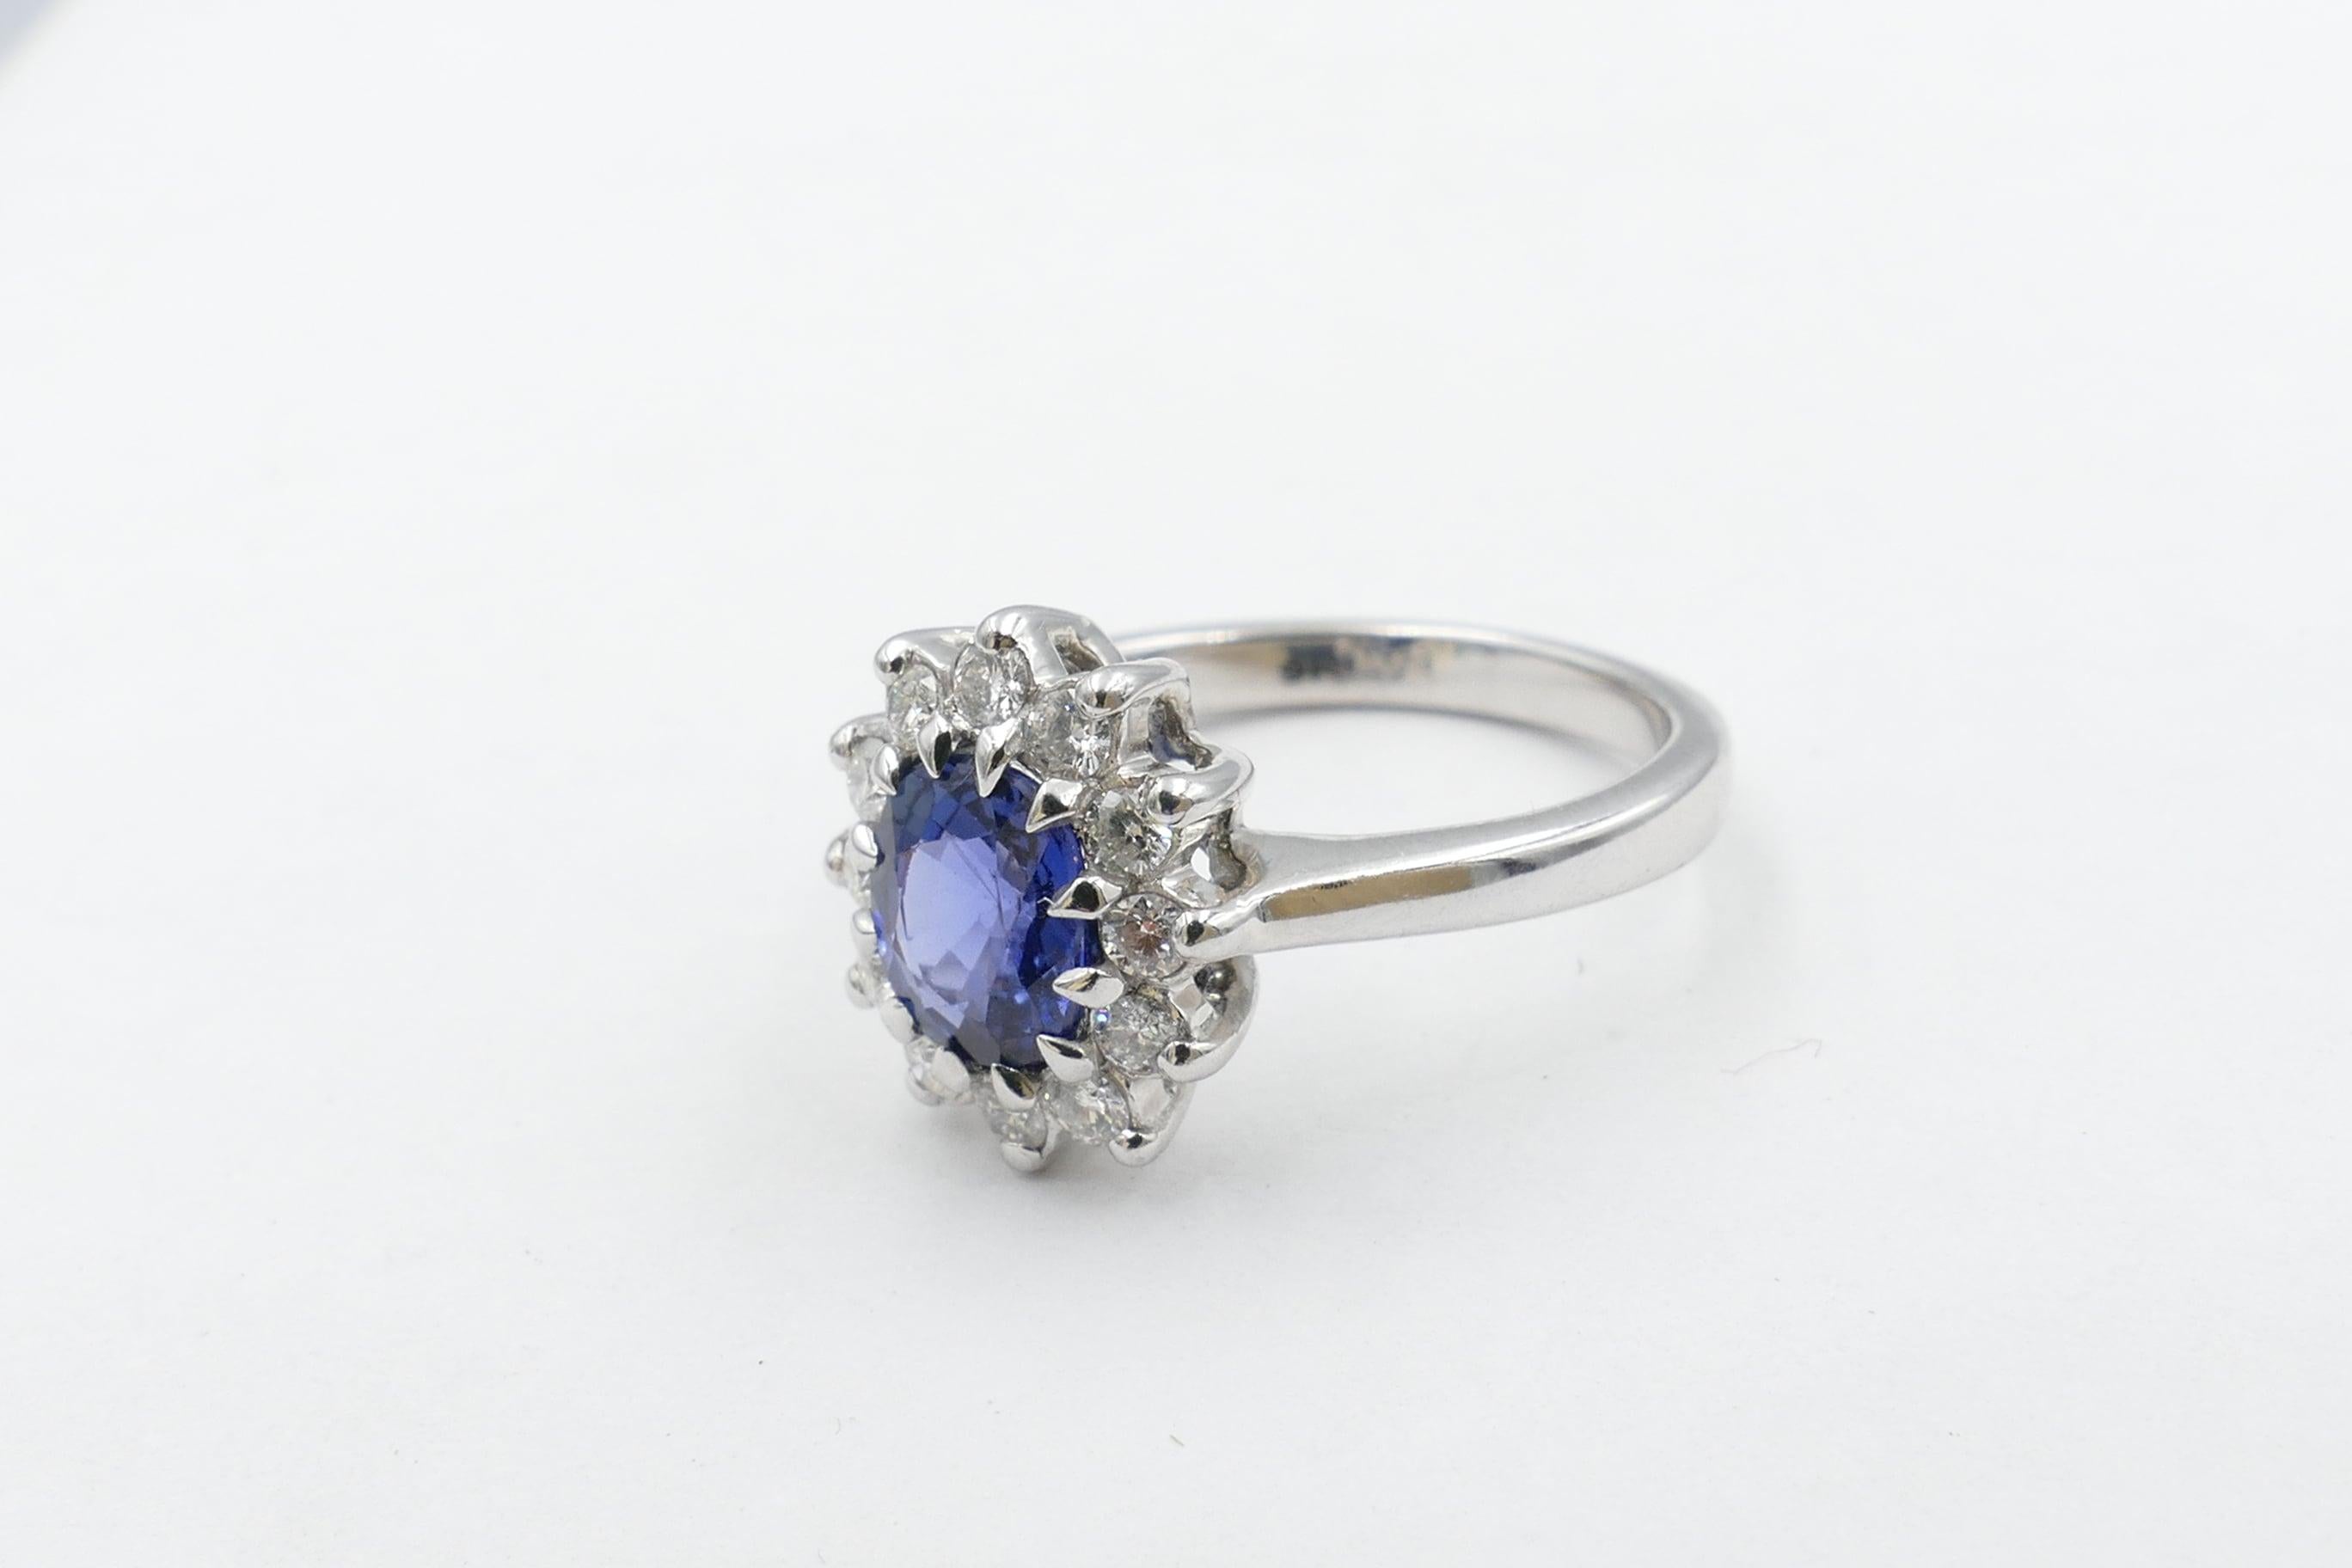 The 1.25 Carat Royal Blue, exceptional quality Sapphire is the centrepiece of this stunning Ring. It is Oval Cut, Clarity - eye clean, multi claw set, centering 12 Round Brilliant Cut Diamonds, bar/claw set, Colour G/H, Clarity SI1 - SI2 and